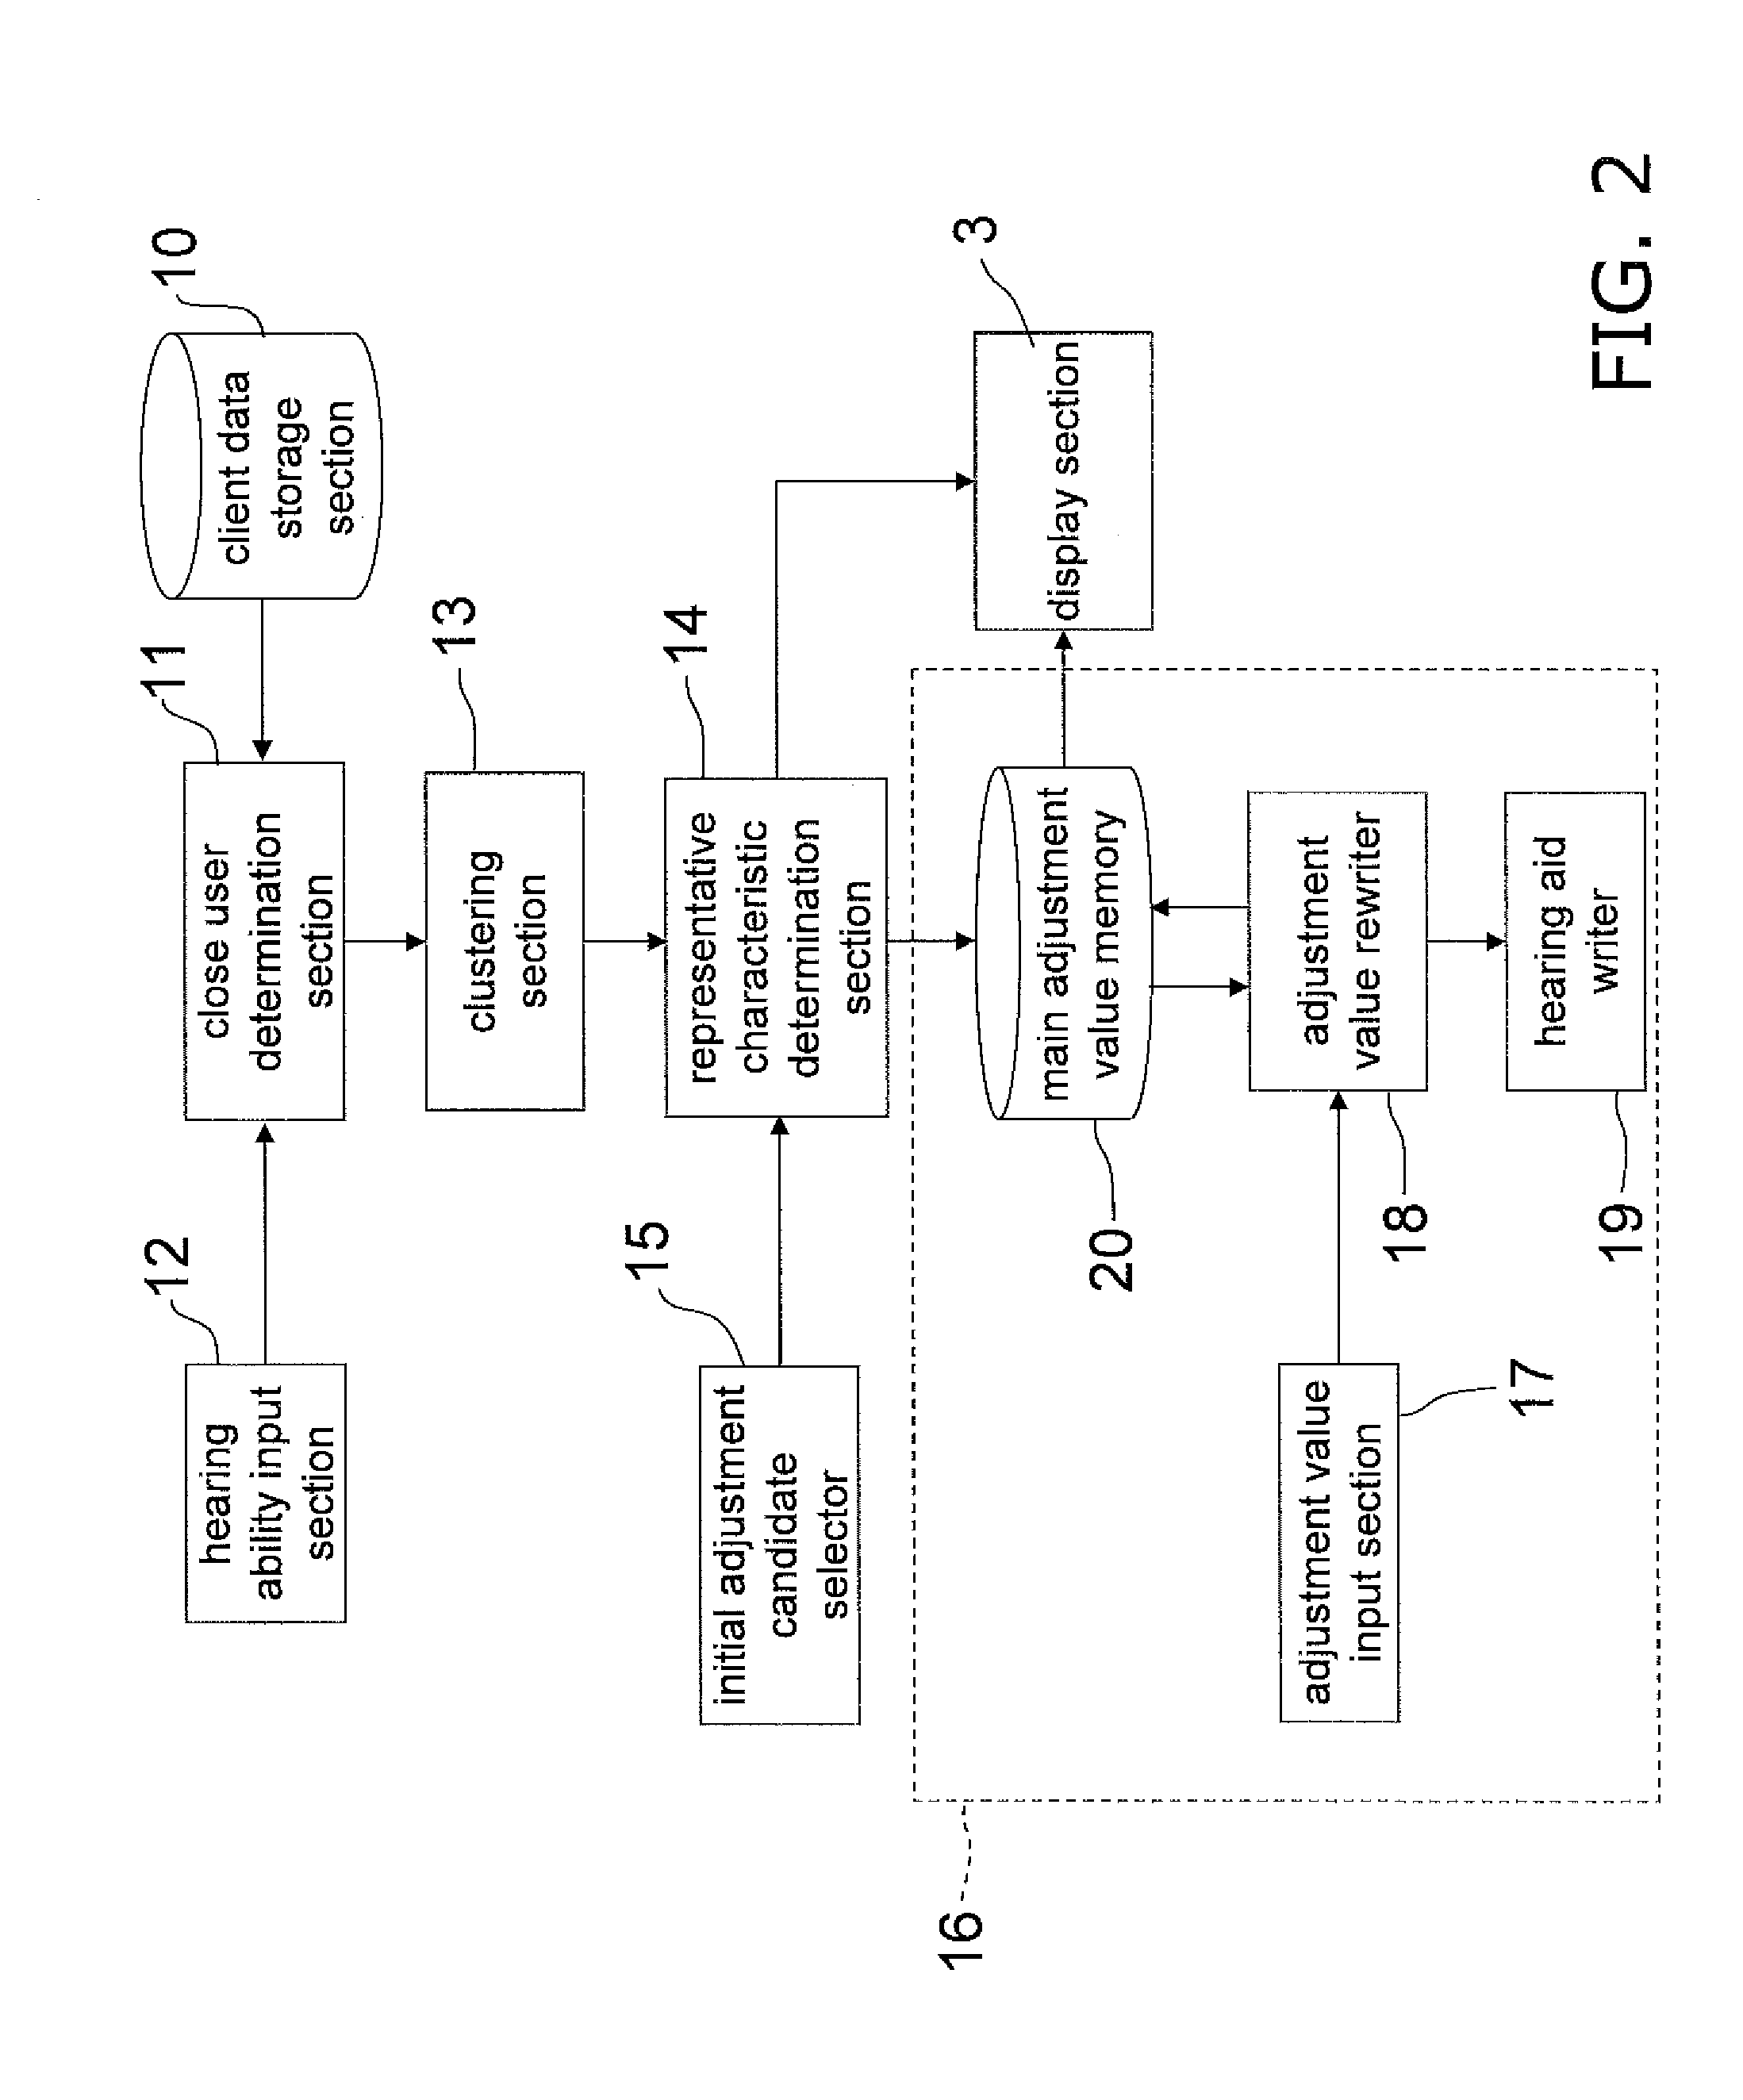 Hearing aid fitting device